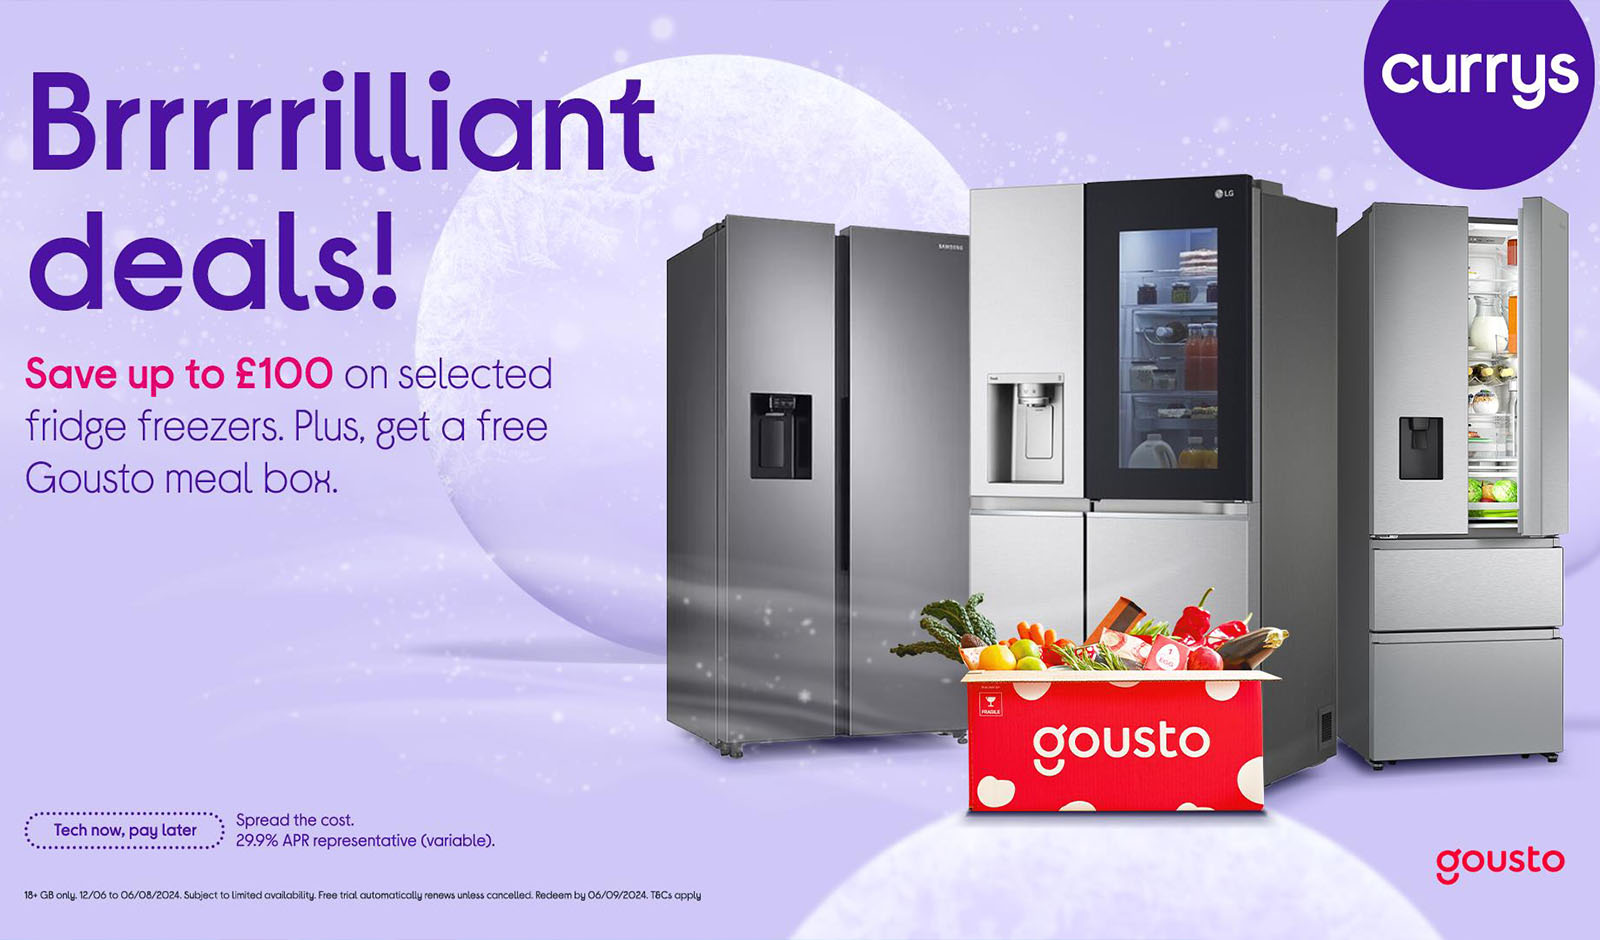 Brrrrrilliant deals! Save up to £100 on selected fridge freezers. Plus, get a free Gousto meal box.